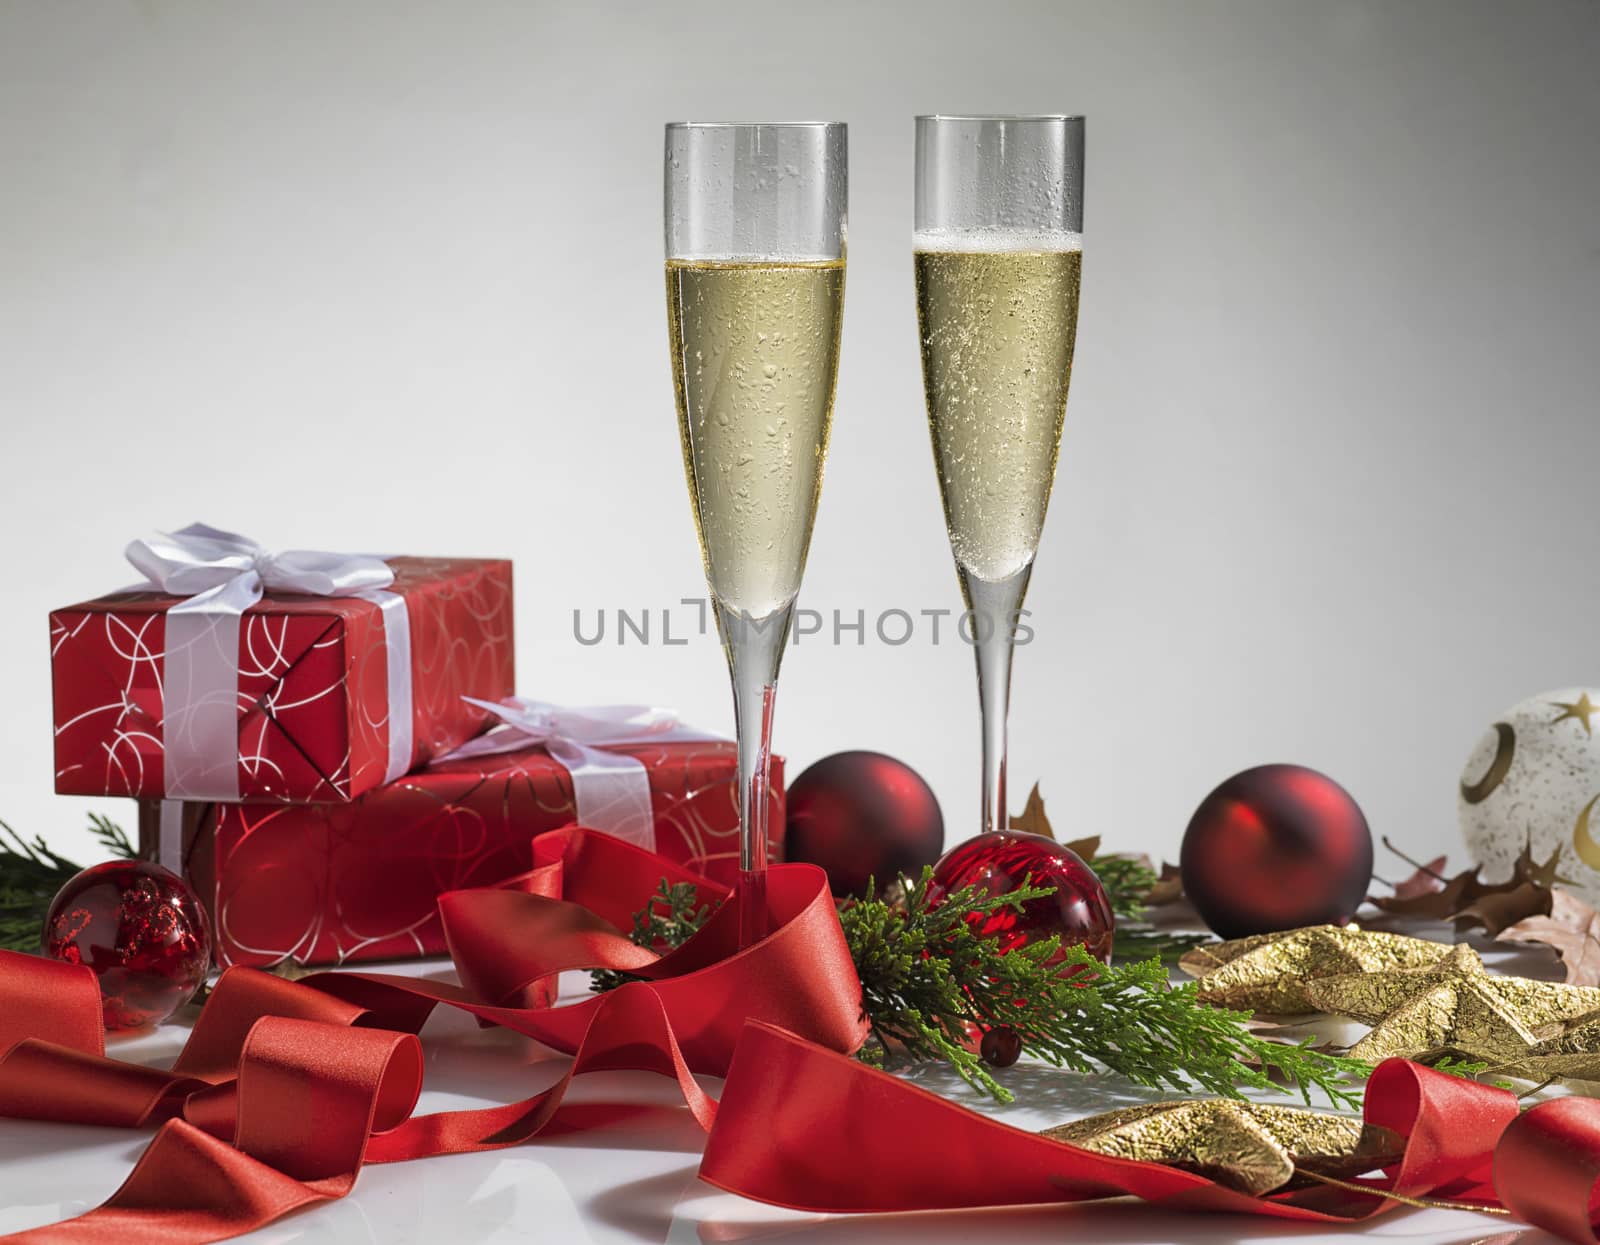 Pair glass of champagne. New year celebration or christmas concept theme. Celebration concept. by janssenkruseproductions